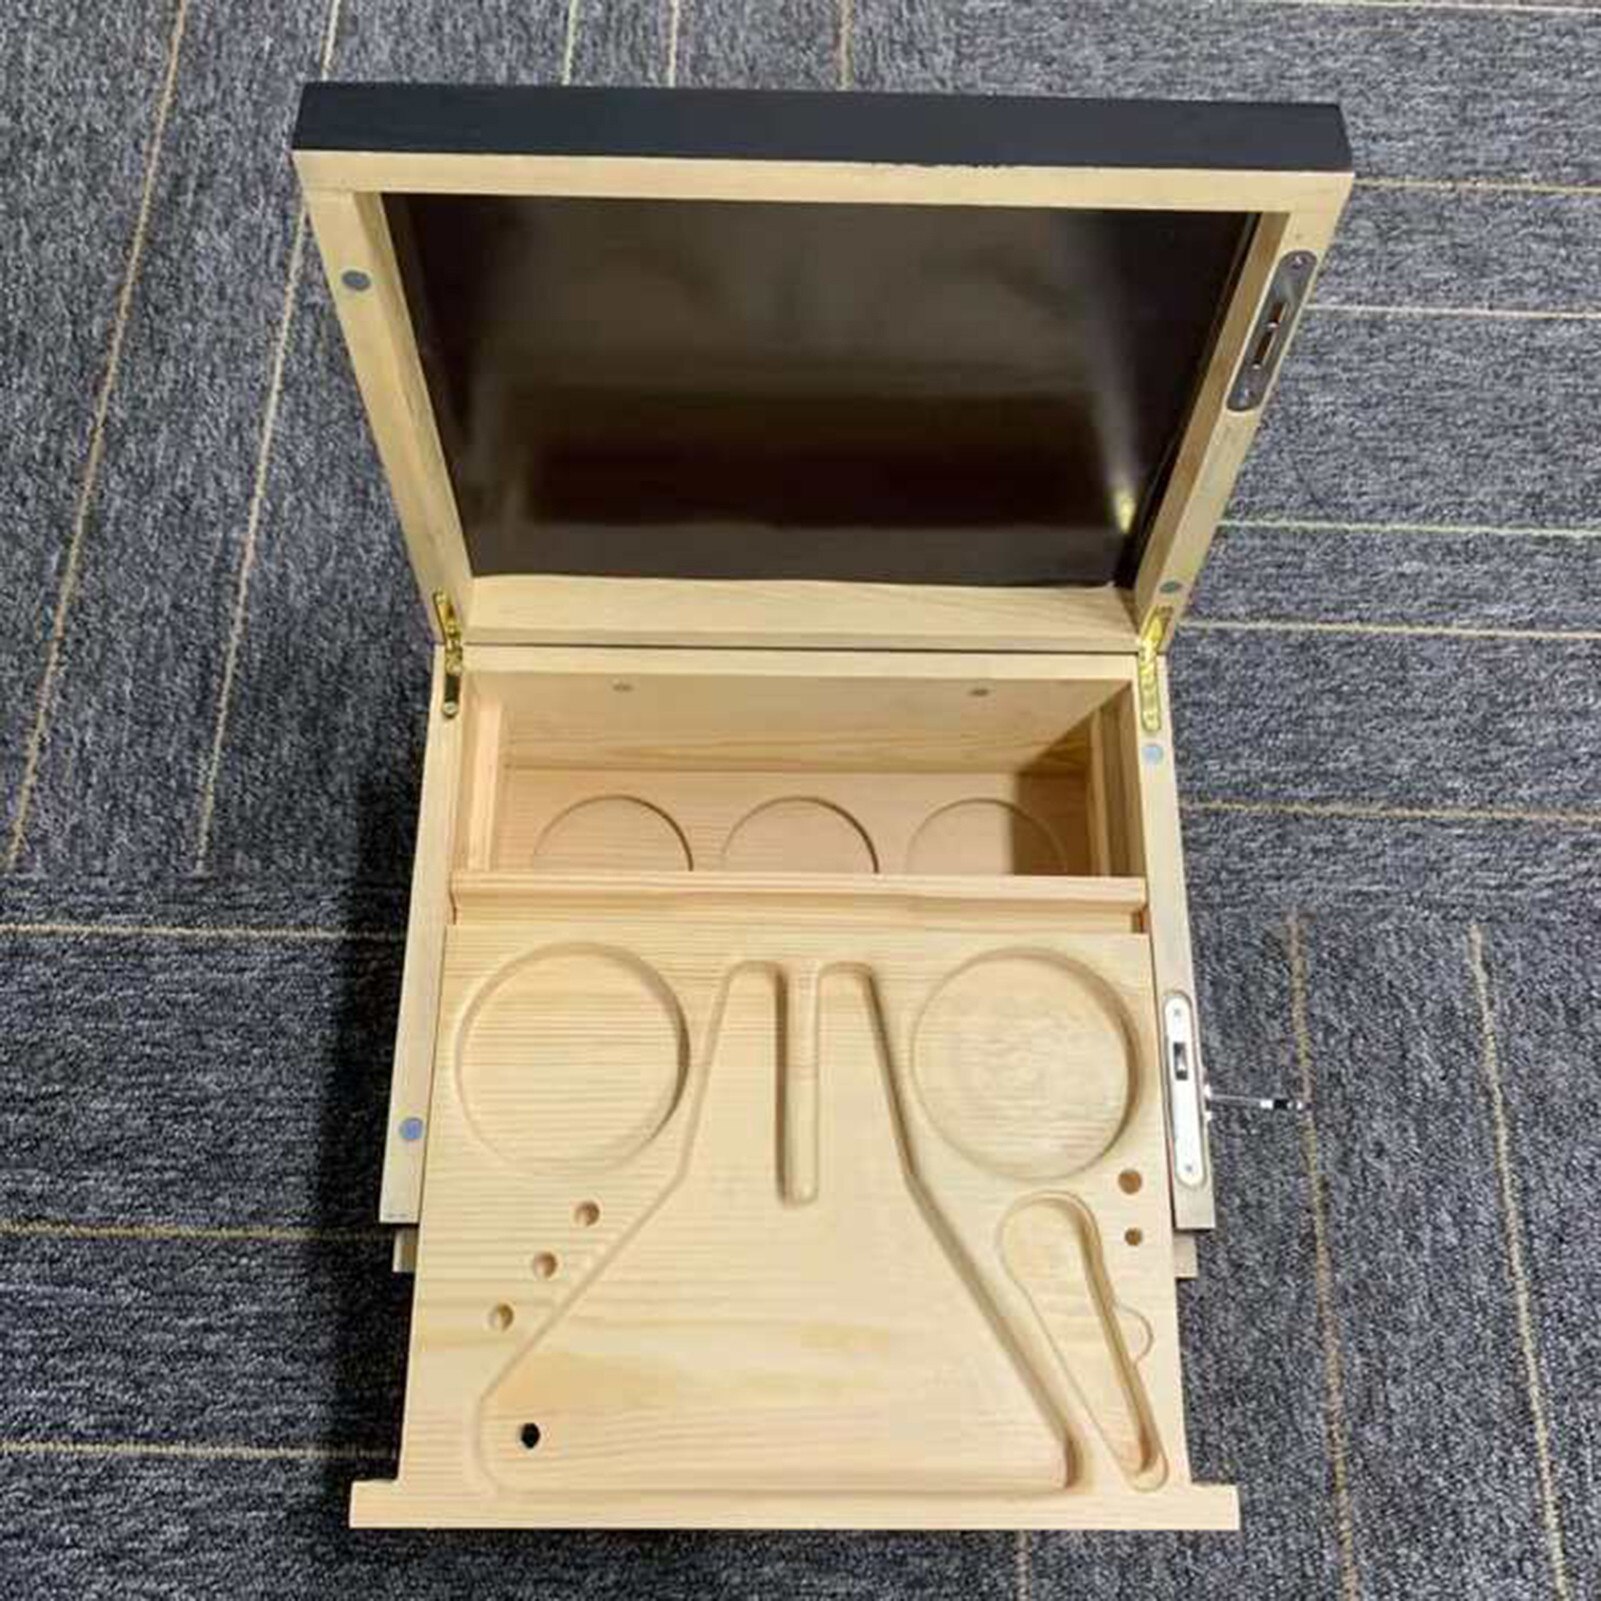 Wood Storage Box with Rolling Tray Multifunction Rolling Box Stash Box Storage Tray Wood For Home 4 - Rolling Tray Shop